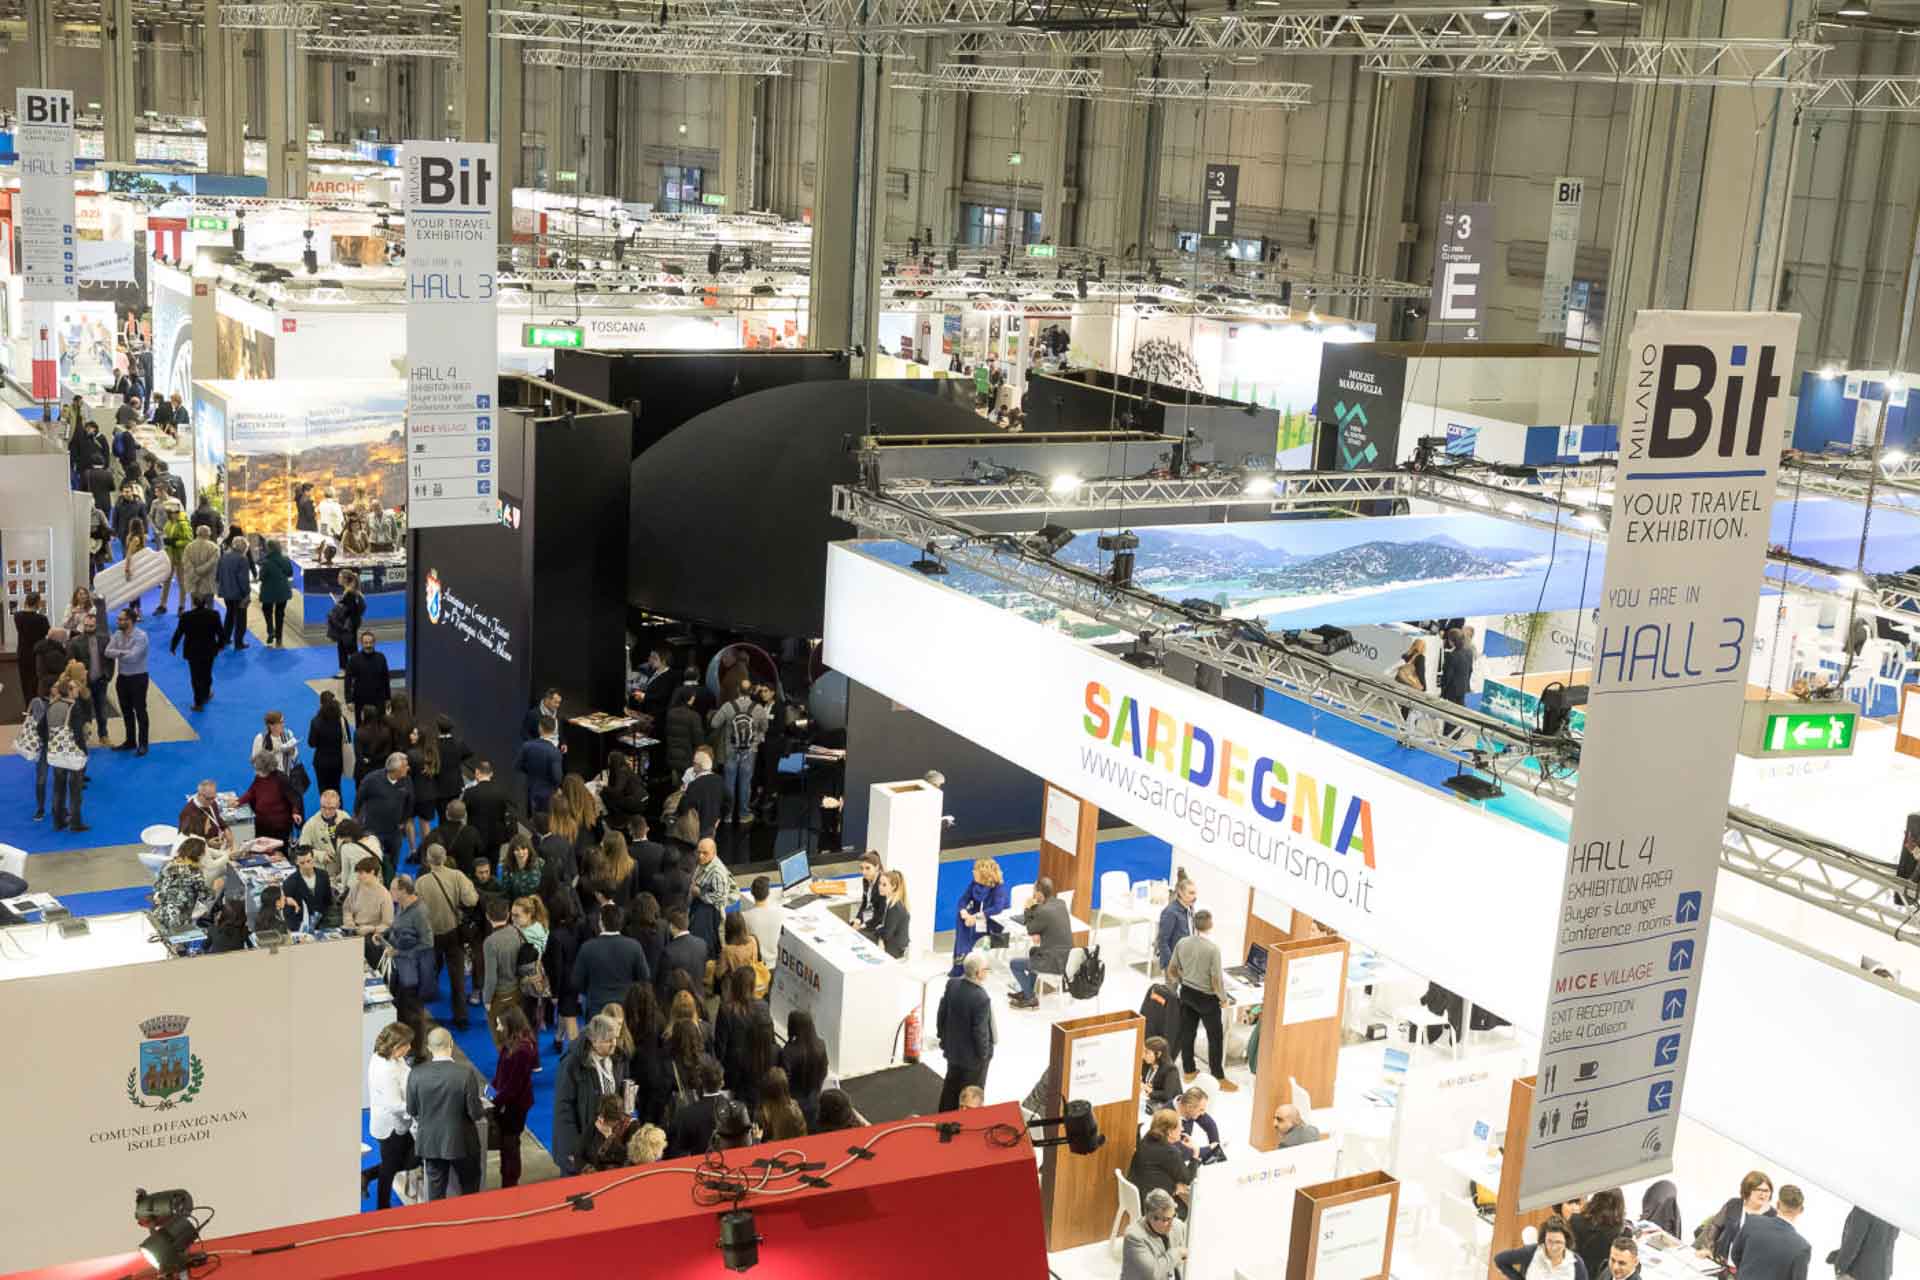 View of the BIT Milano expo with the Sardigna stall